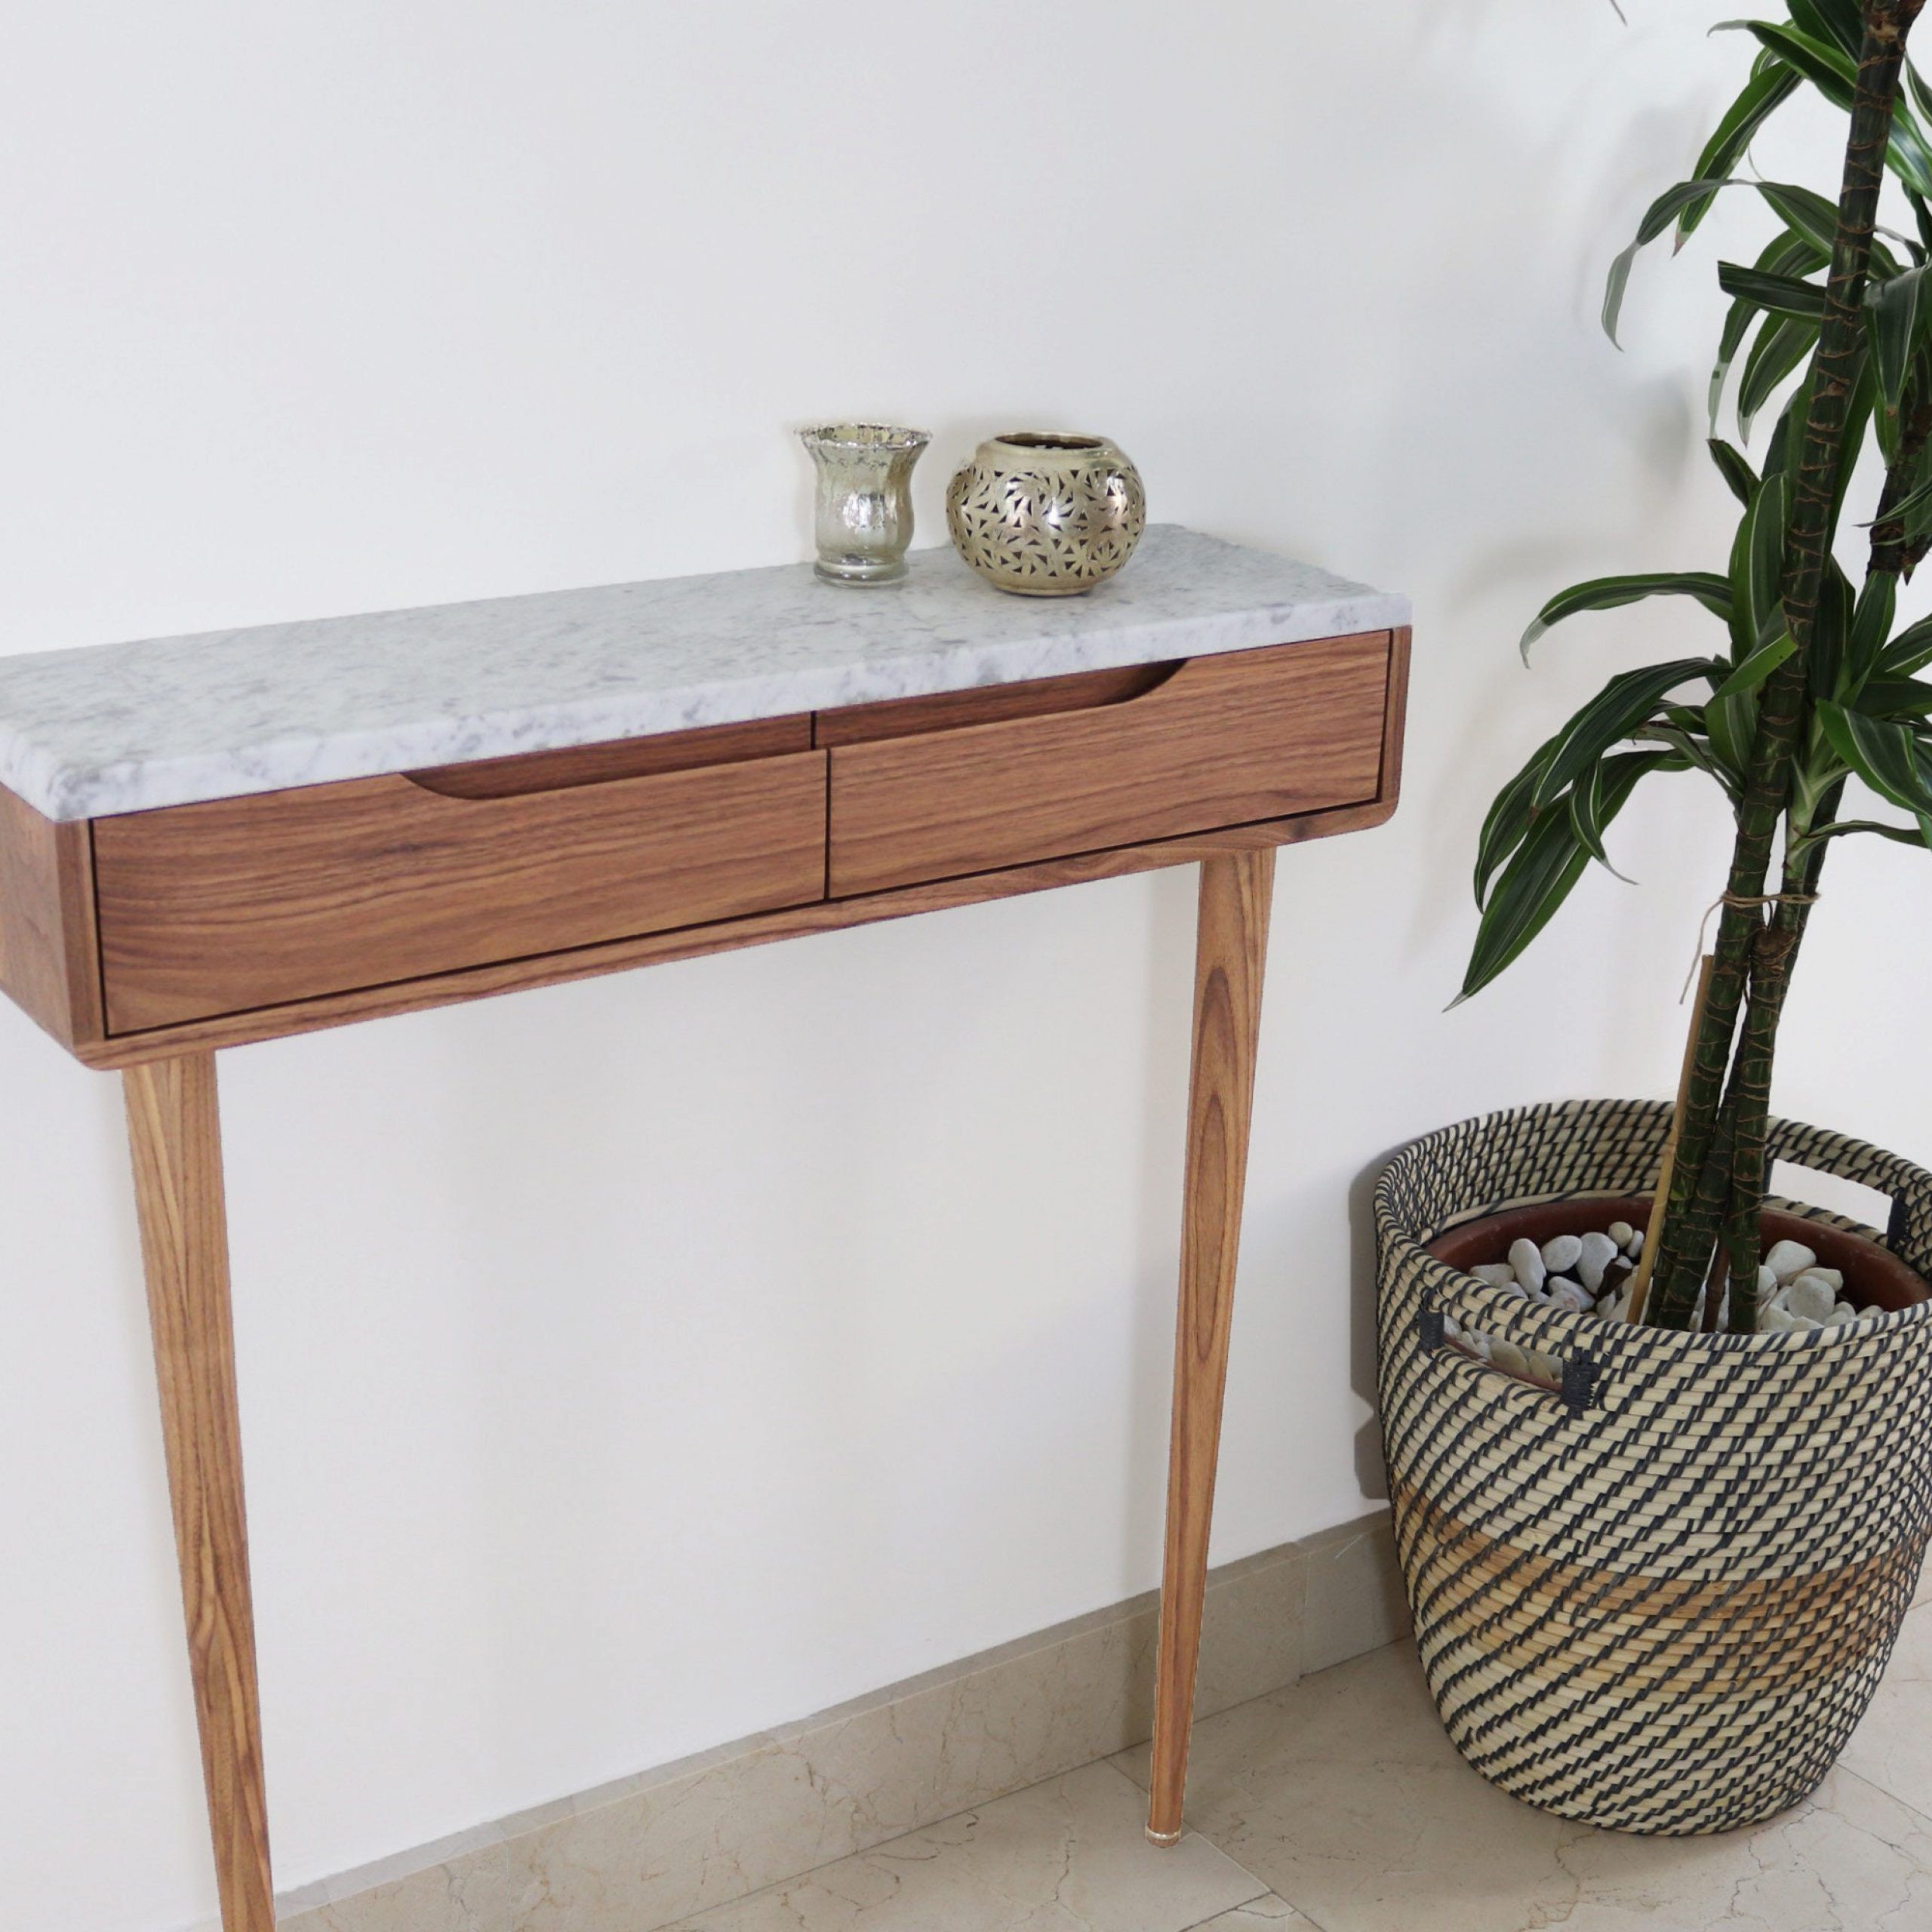 Most Recently Released Honey Oak And Marble Console Tables Pertaining To Console Table With Drawers In Solid American Oak Or Walnut (View 4 of 10)